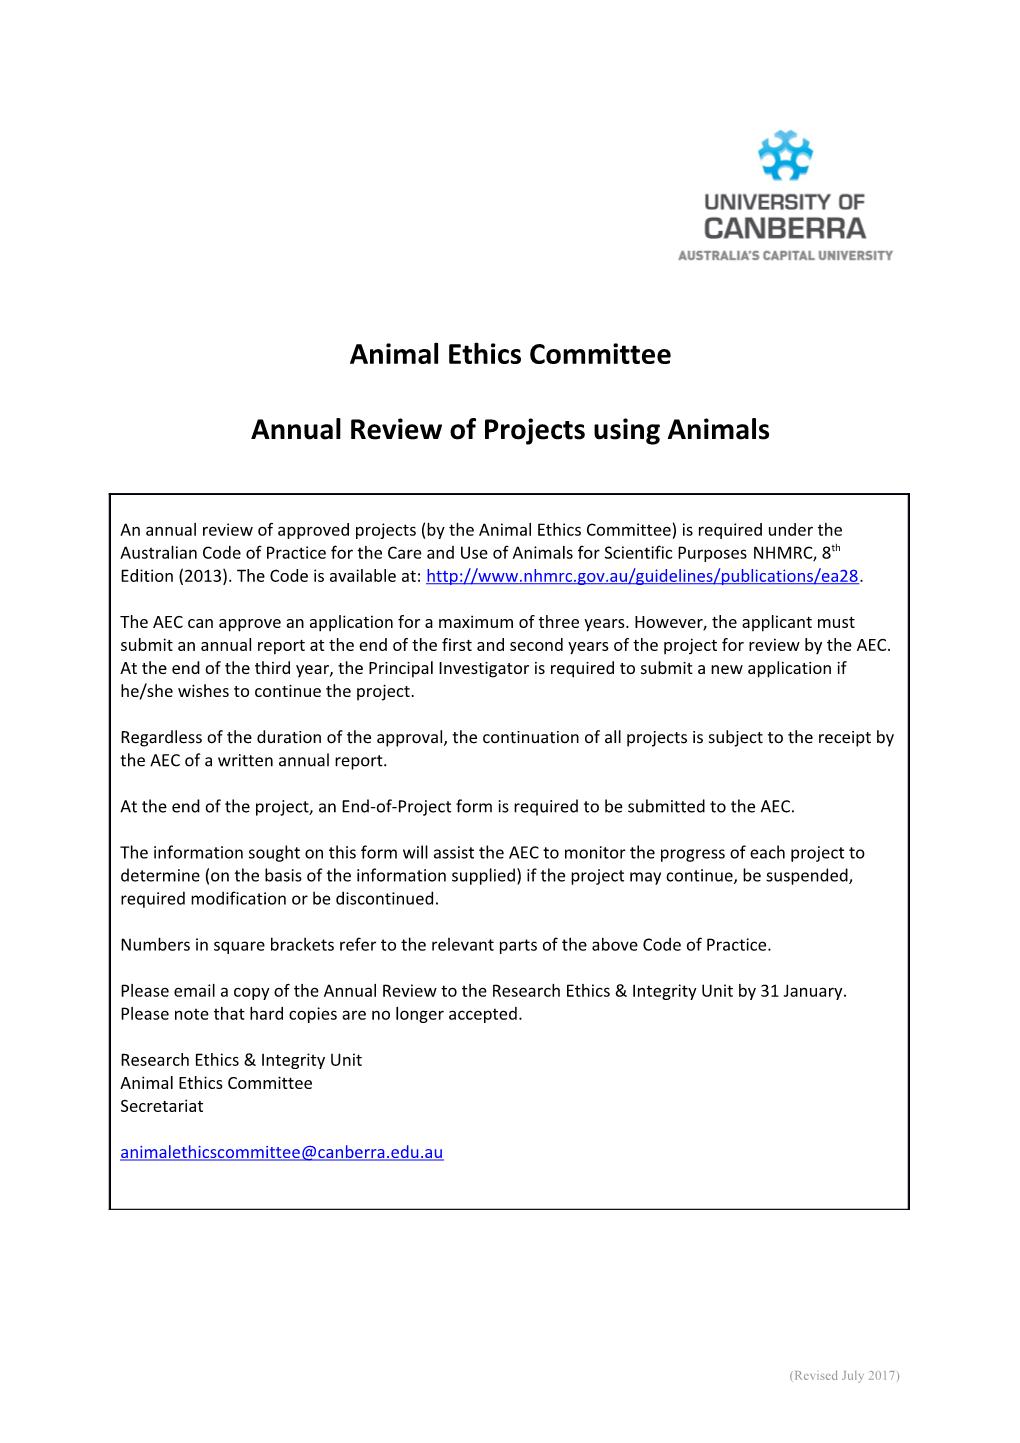 Annual Review of Projects Using Animals